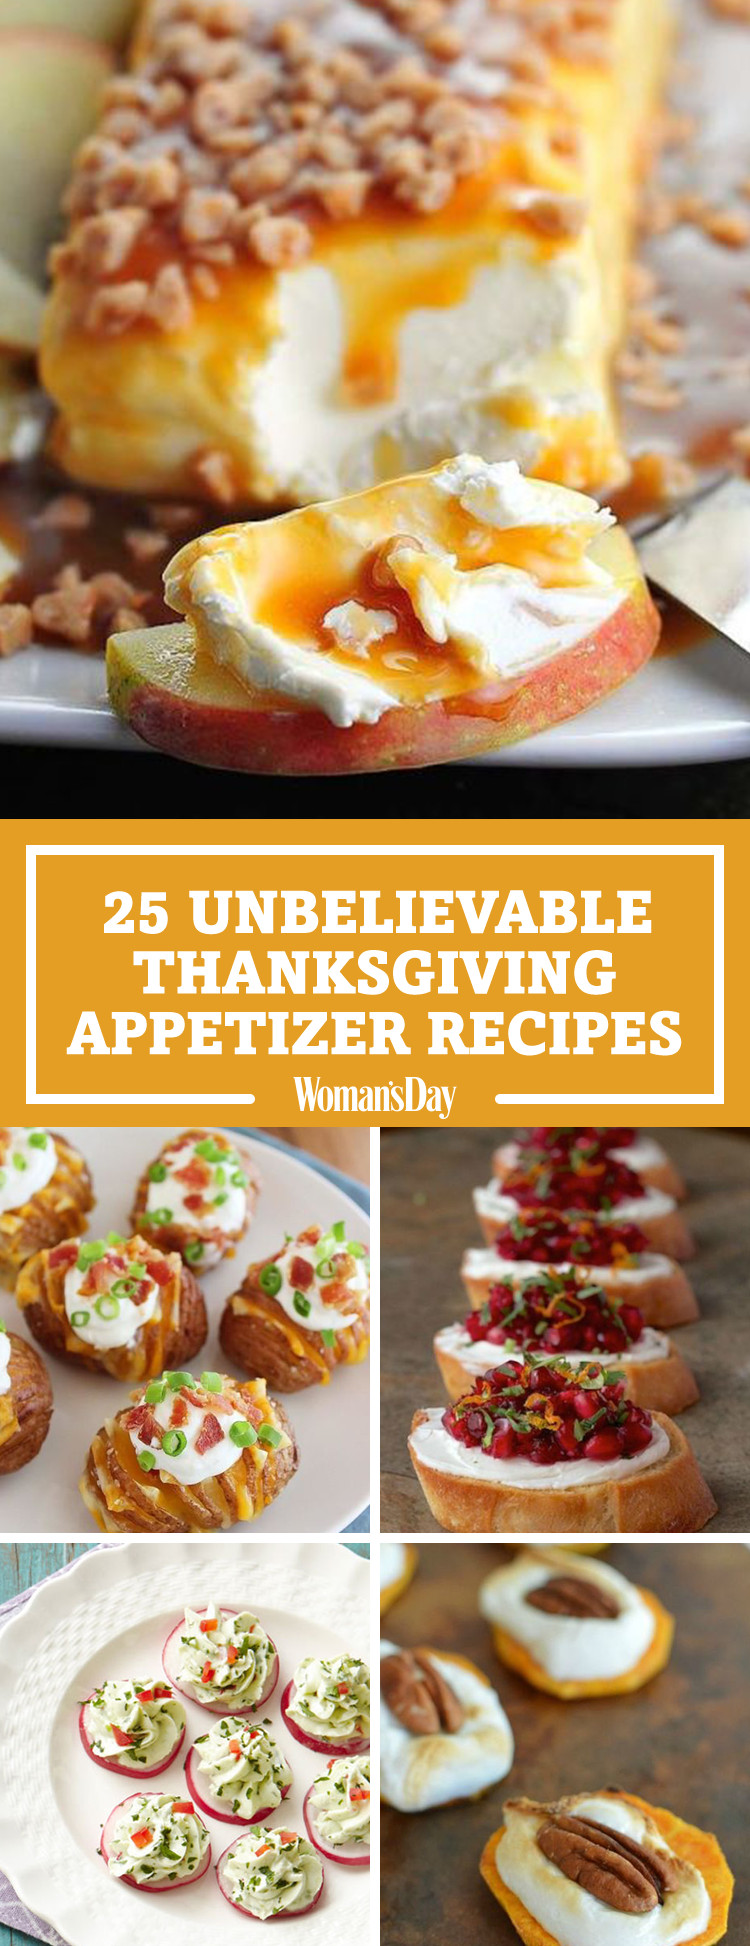 Appetizer Ideas For Thanksgiving
 34 Easy Thanksgiving Appetizers Best Recipes for